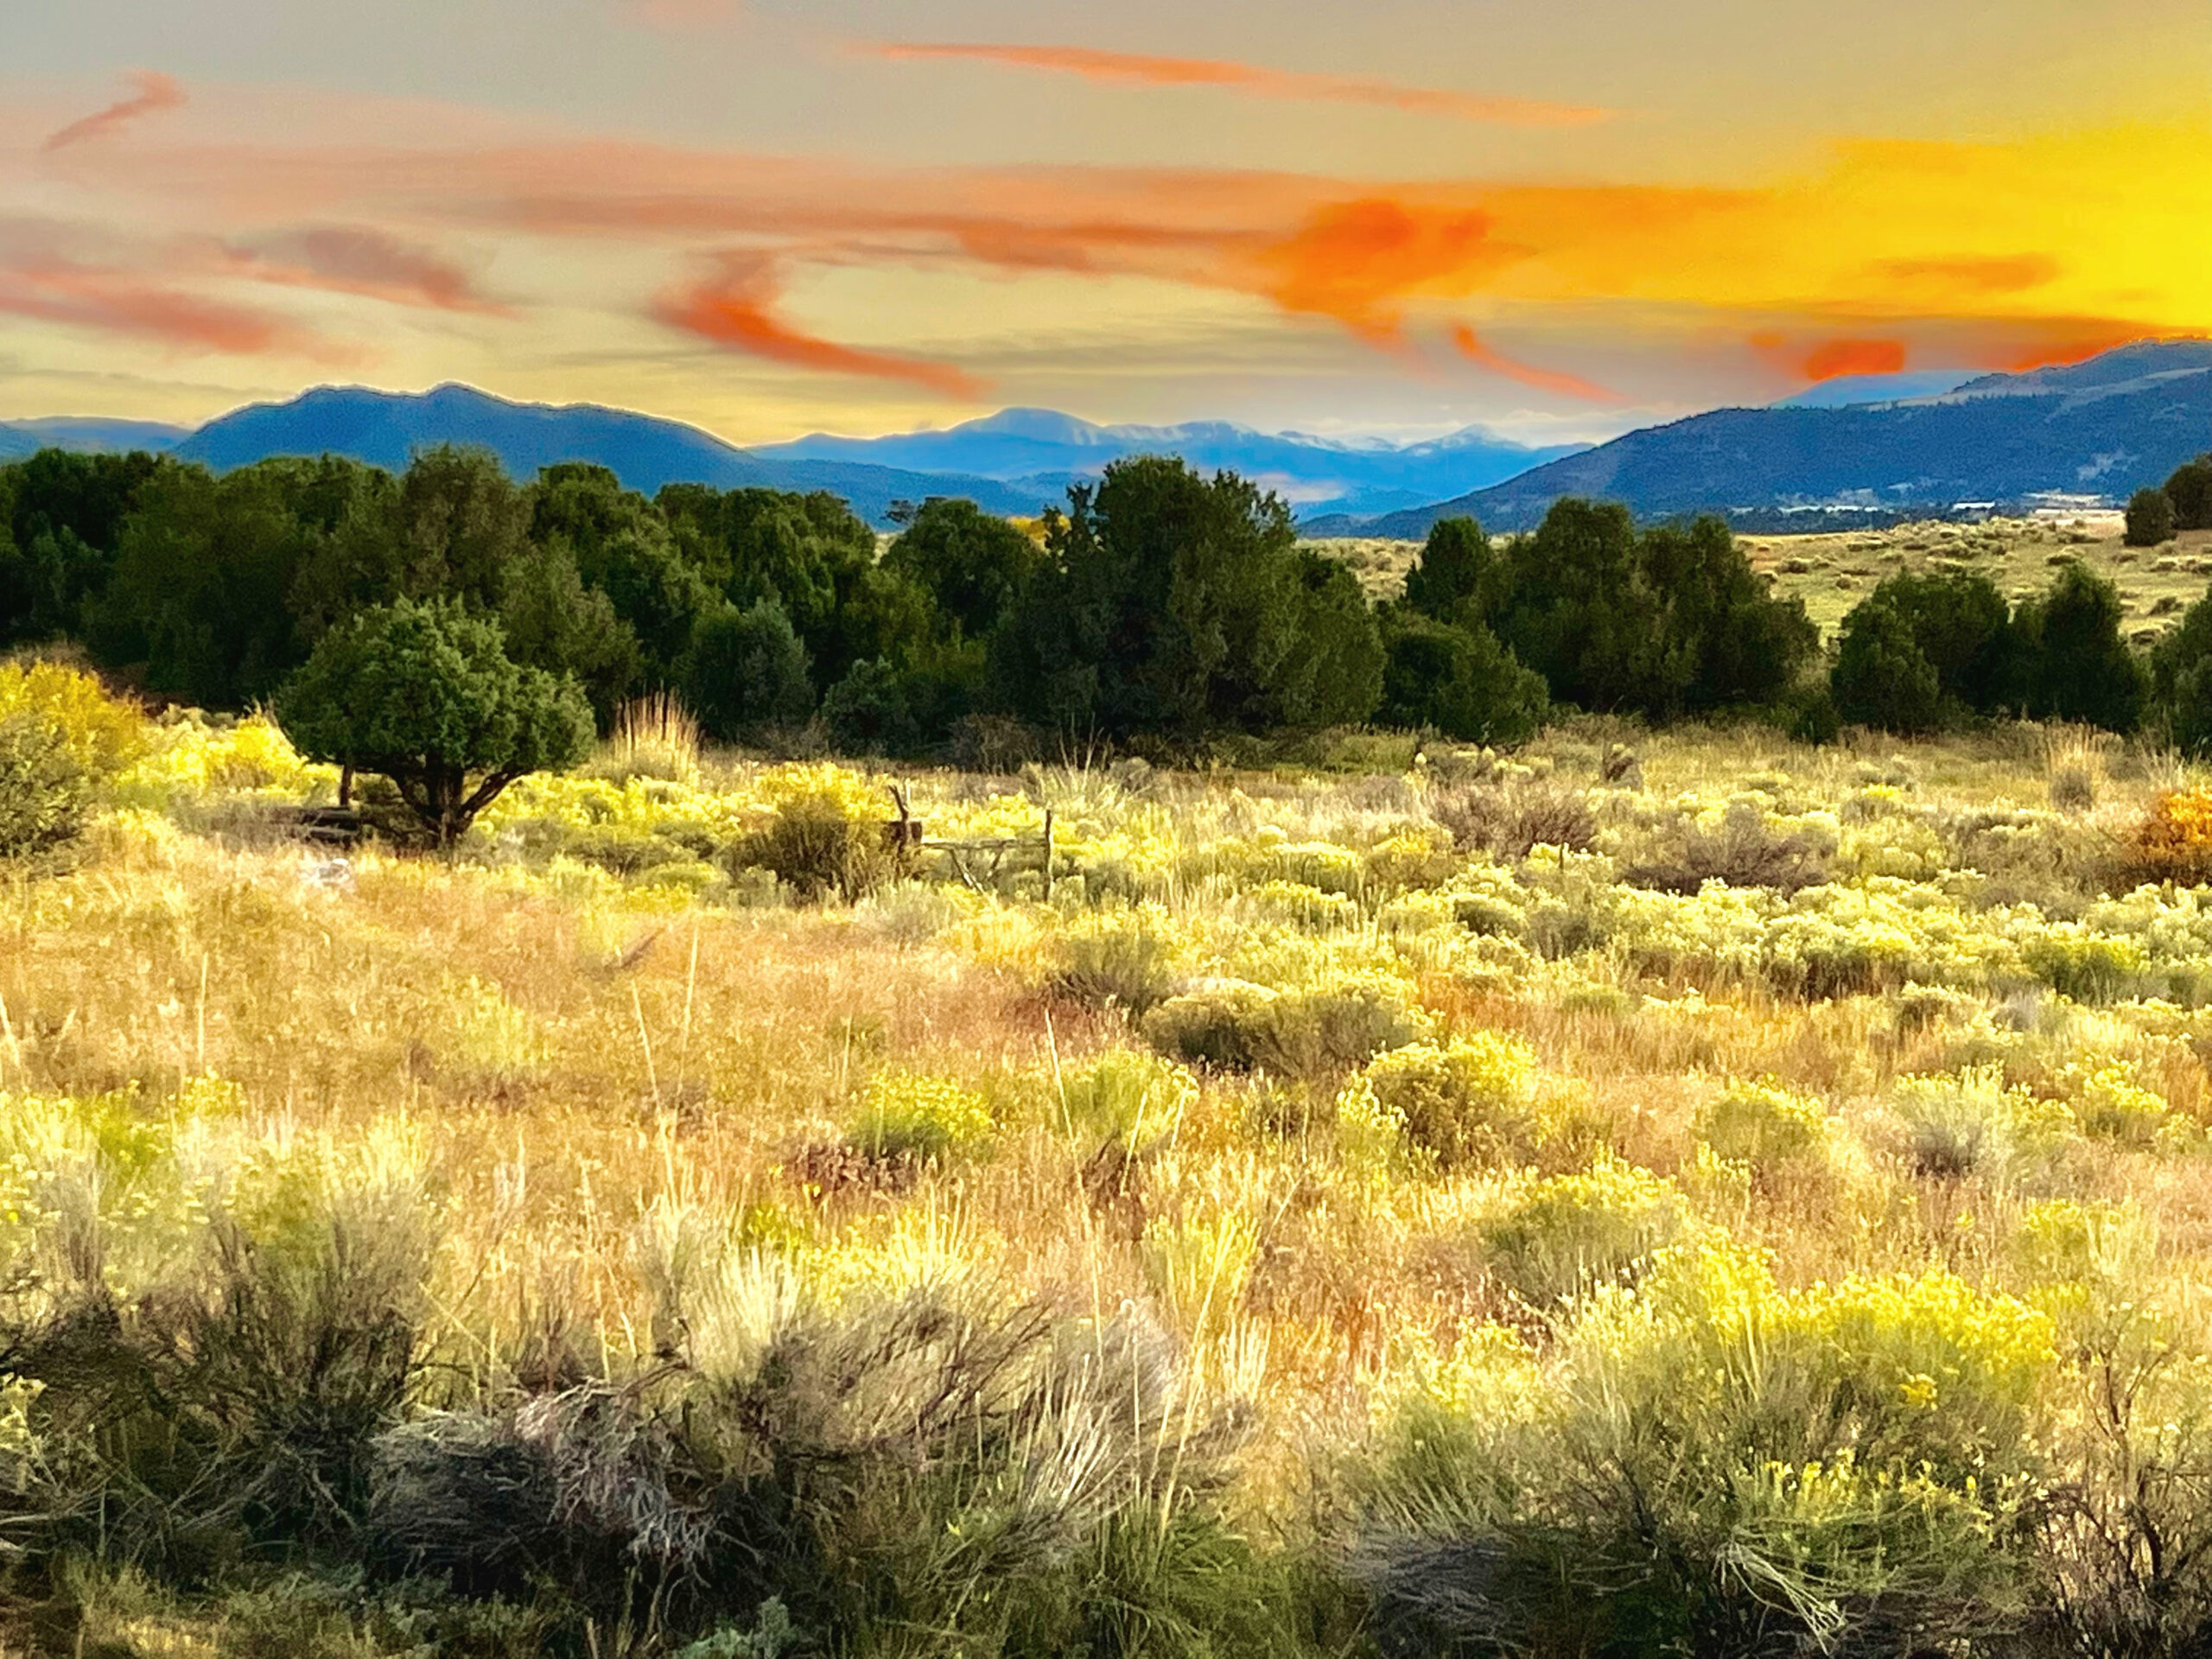 A sunset over a grassy field with mountains in the background.